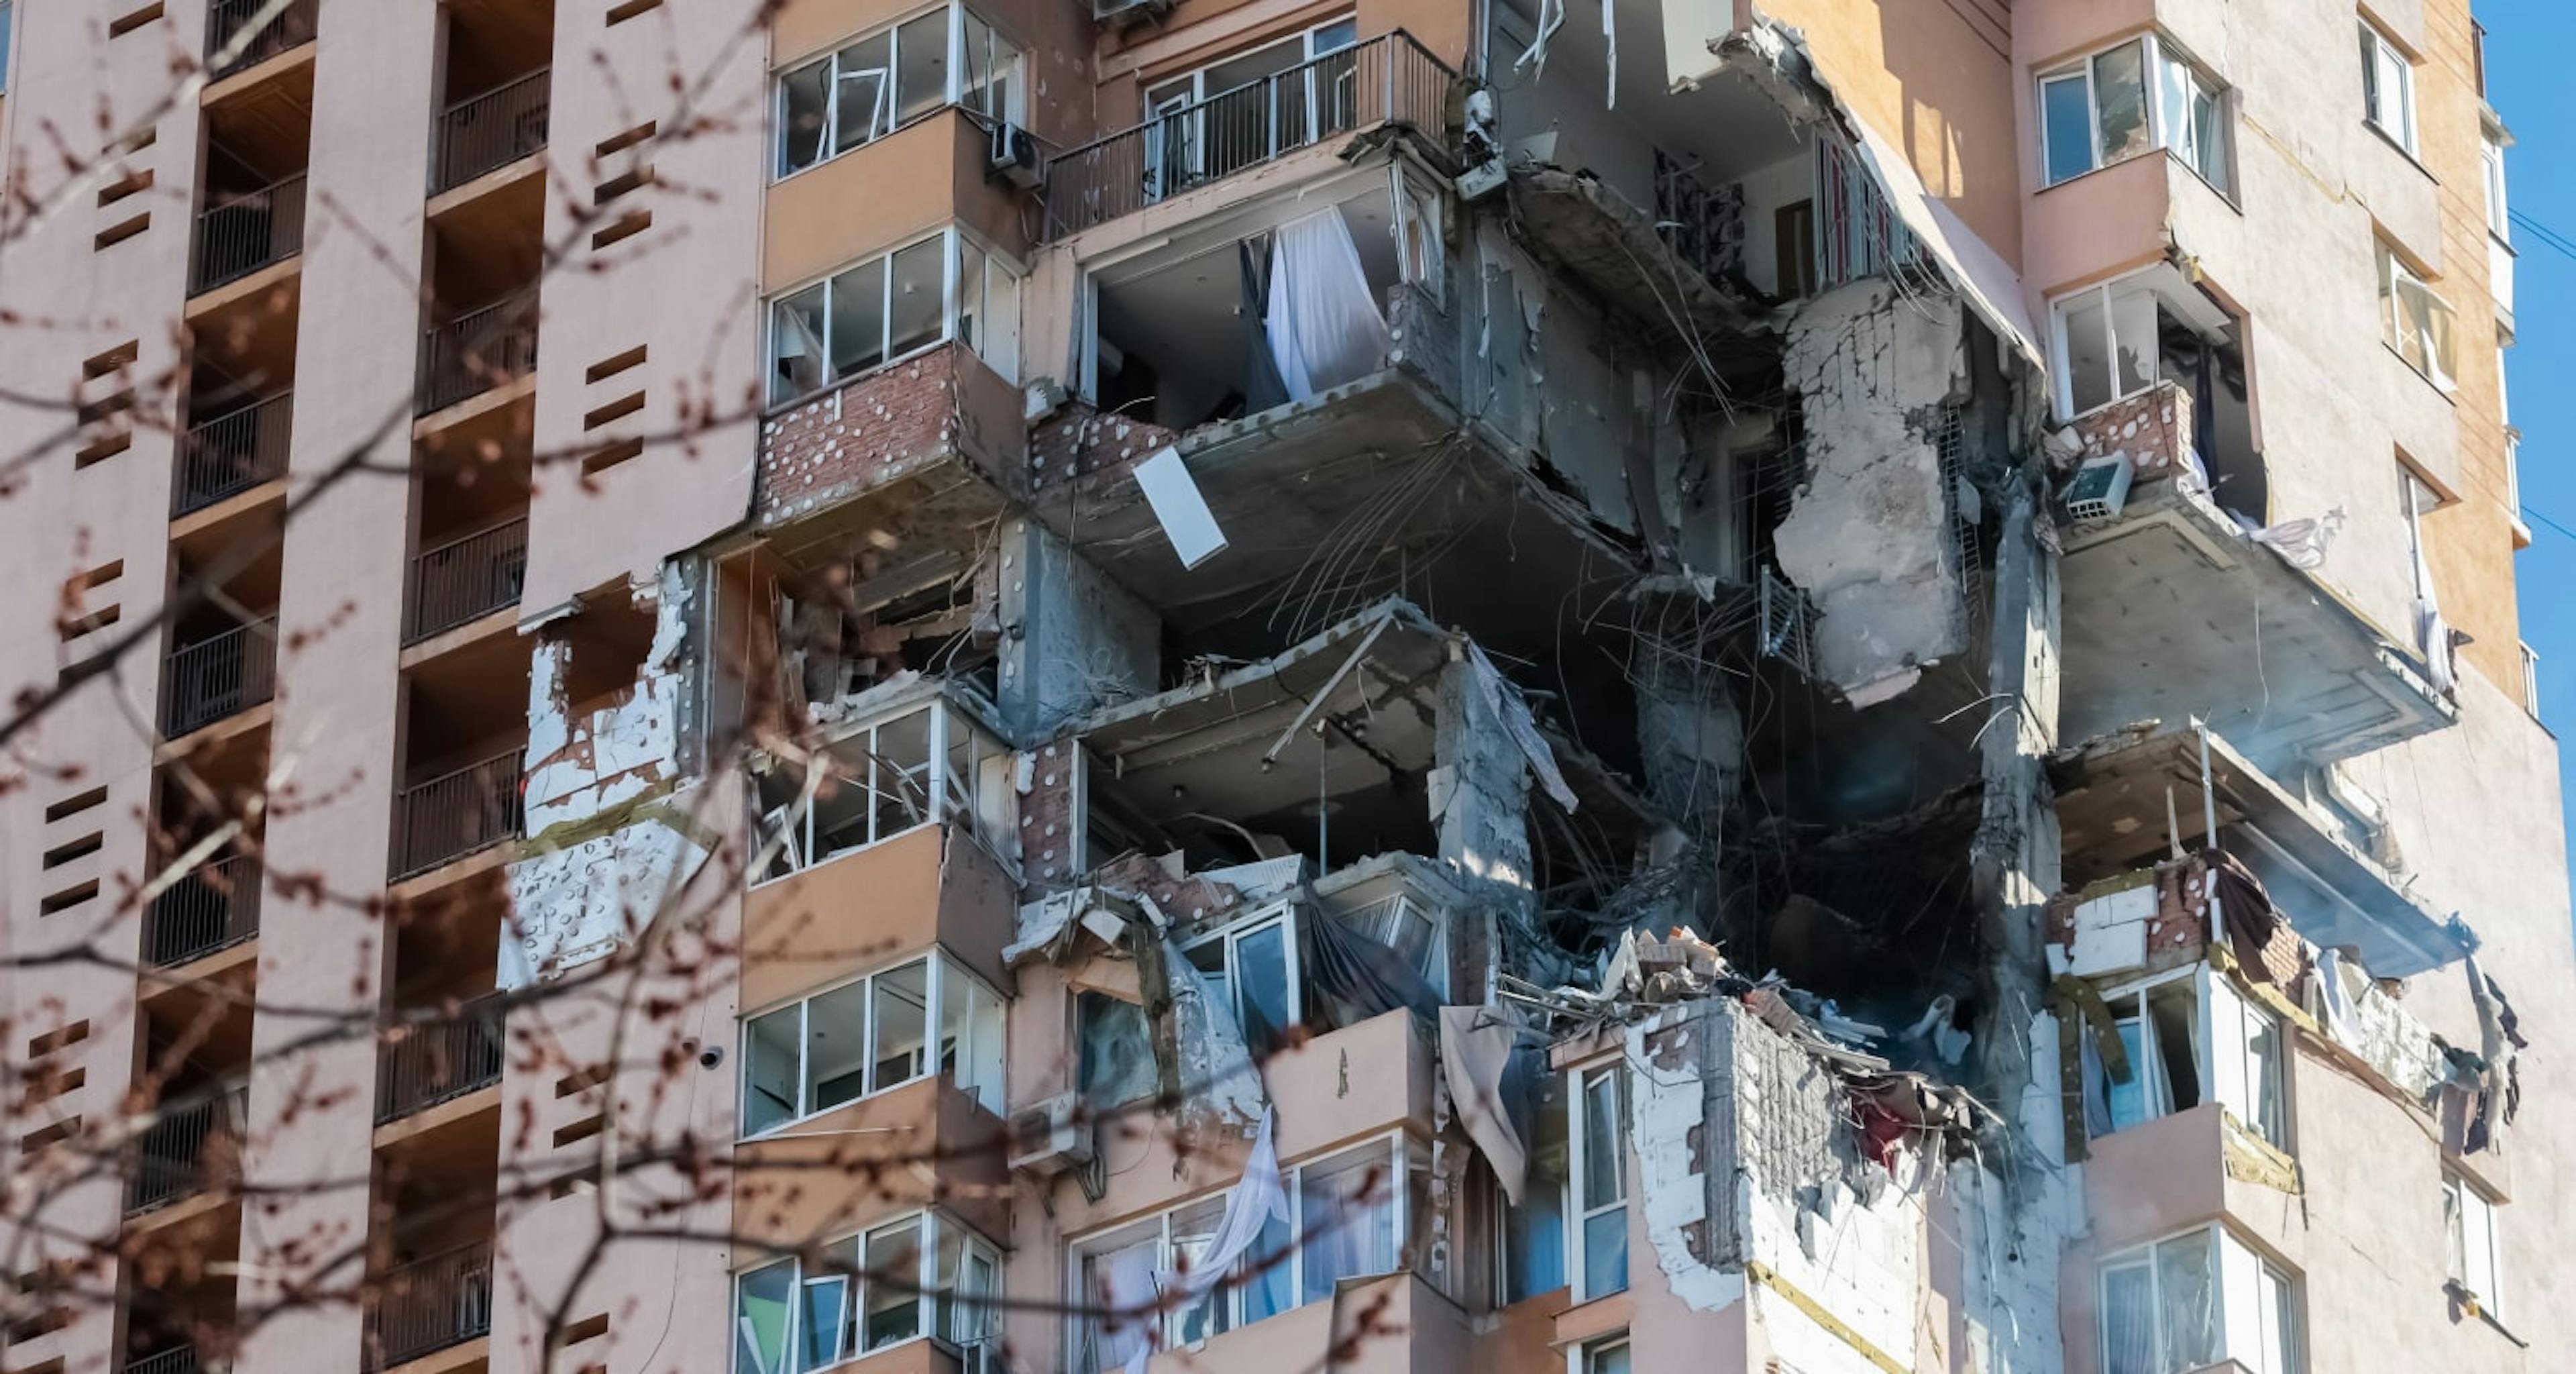 Damaged block of flats in Kyiv due to the Russian shelling, Lobanovsky streer 26.02.2022. source: https://standwithukraine.digital